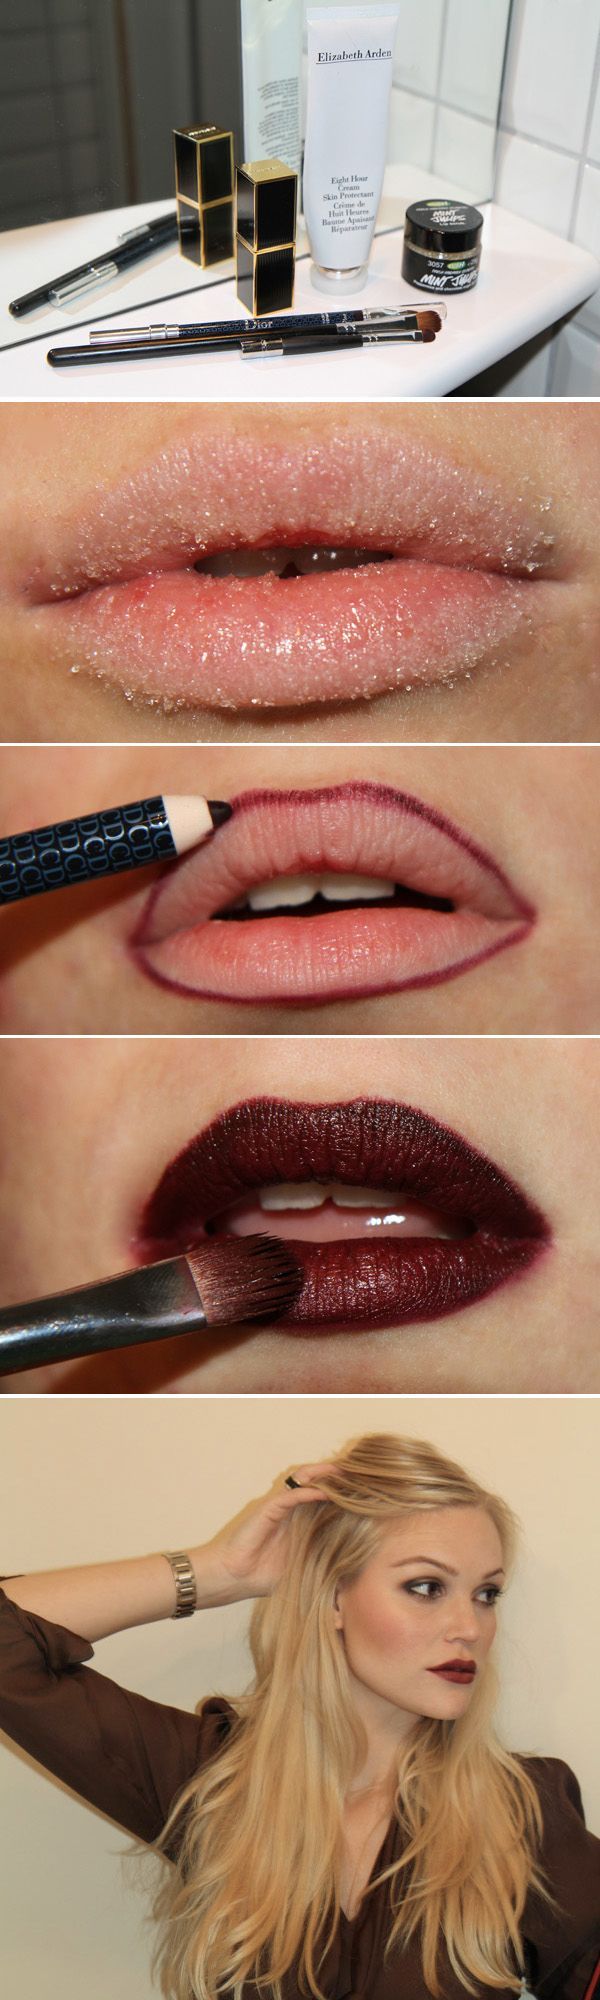 Dark Lipstick How-To (the most common mistake made for applying any lip product